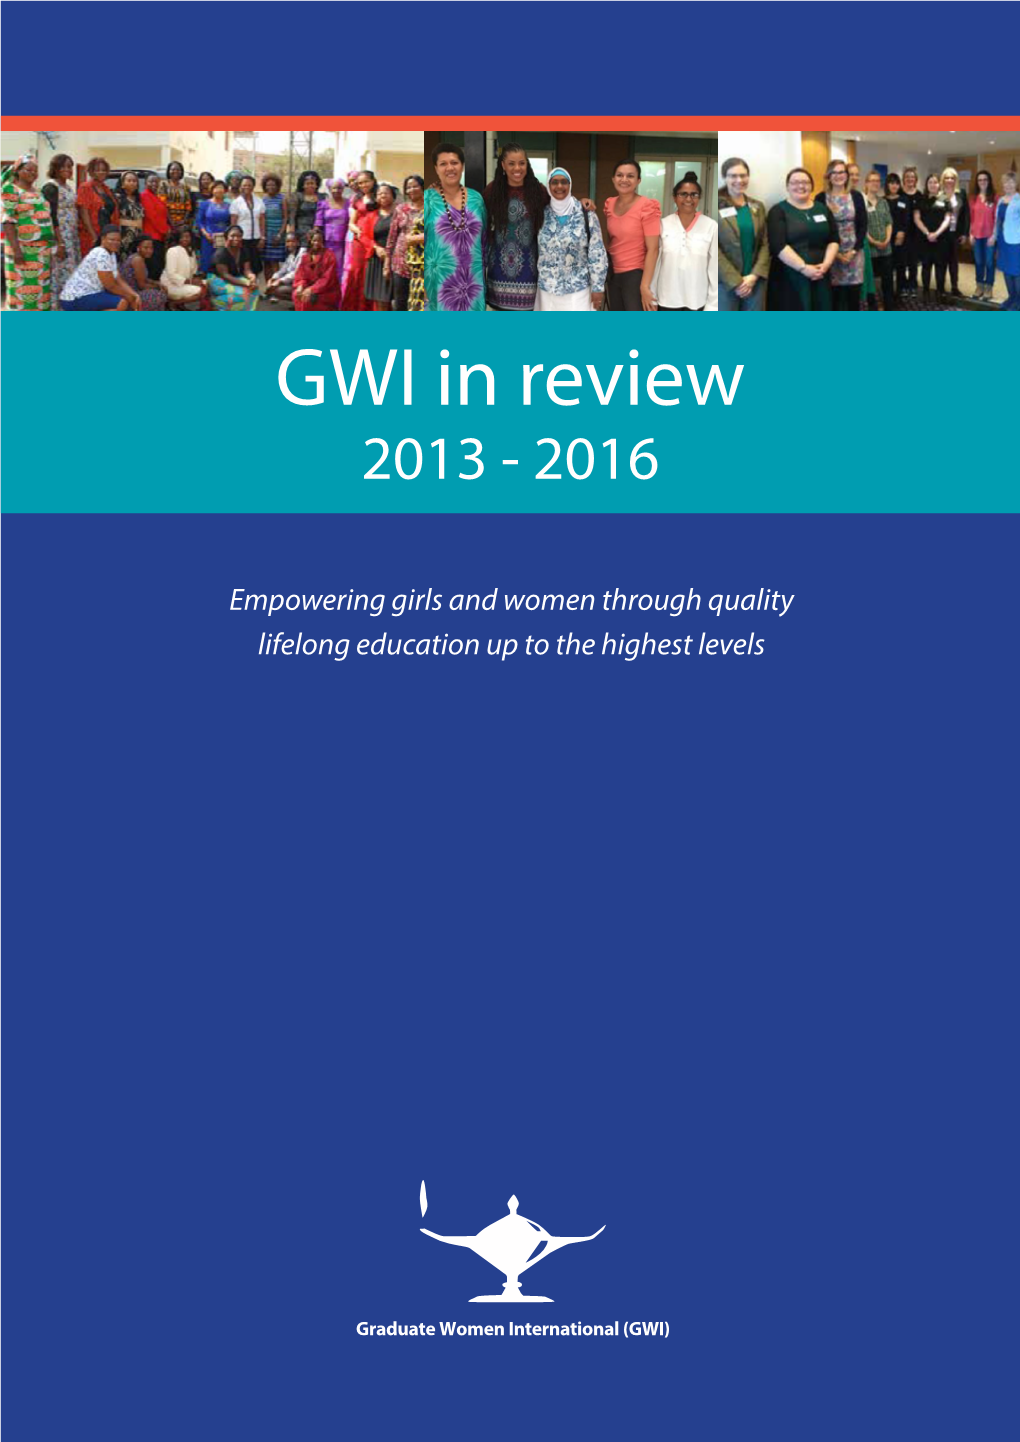 GWI in Review 2013 - 2016